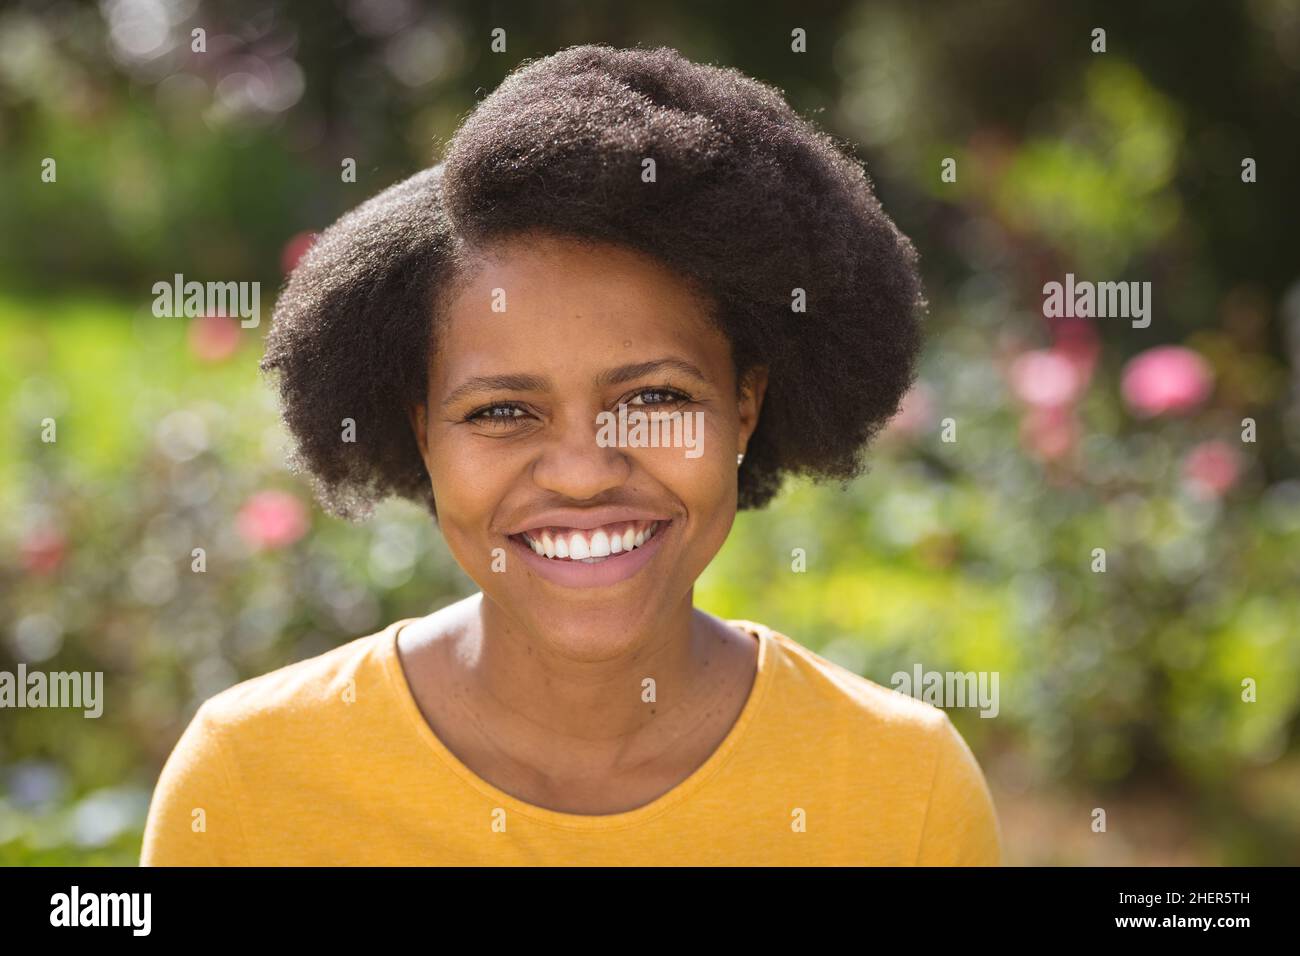 Portrait of happy mid adult woman with afro hairstyle in backyard on sunny day Stock Photo